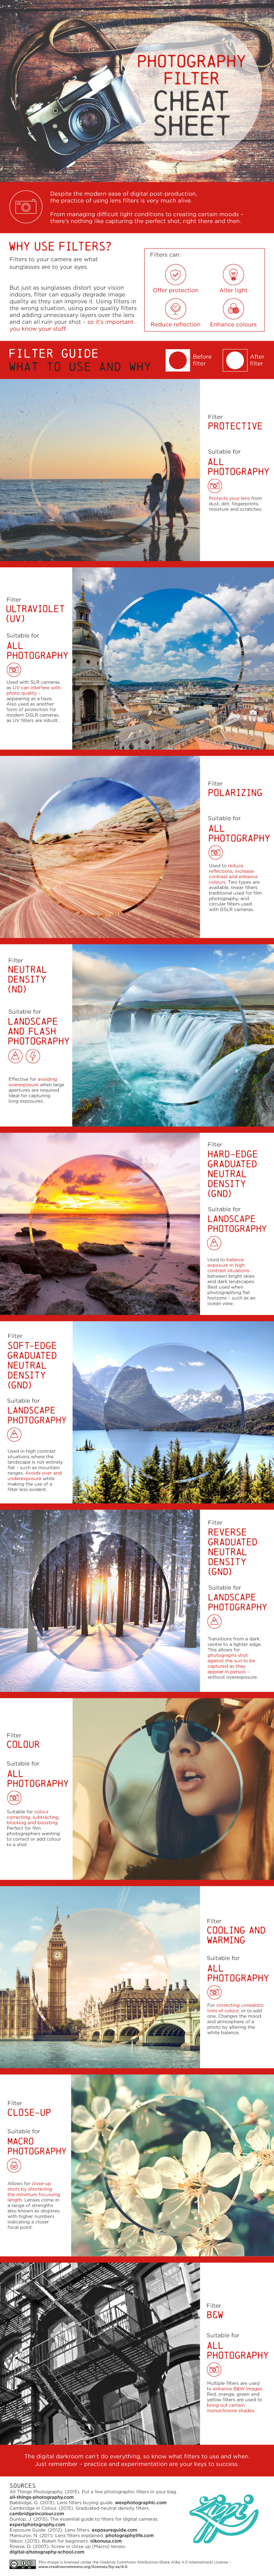 Photography Filters - A Cheat Sheet